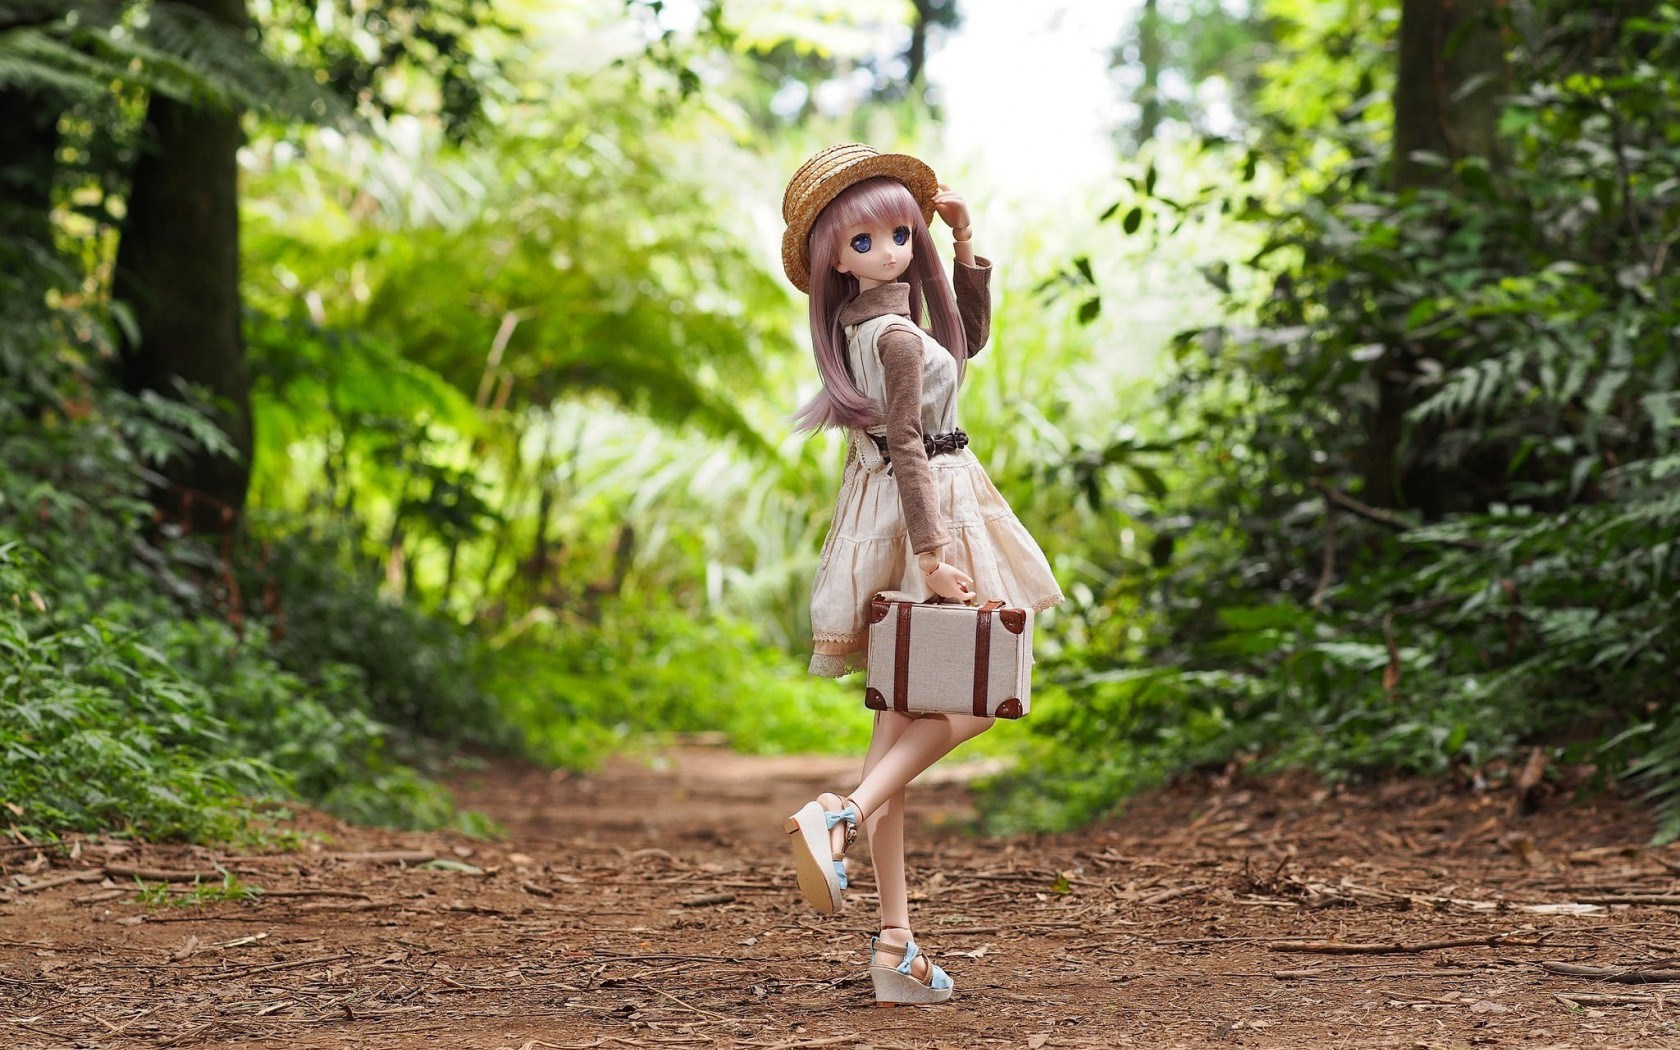 Anime Toy Doll Wallpaper - Doll Images In Nature , HD Wallpaper & Backgrounds